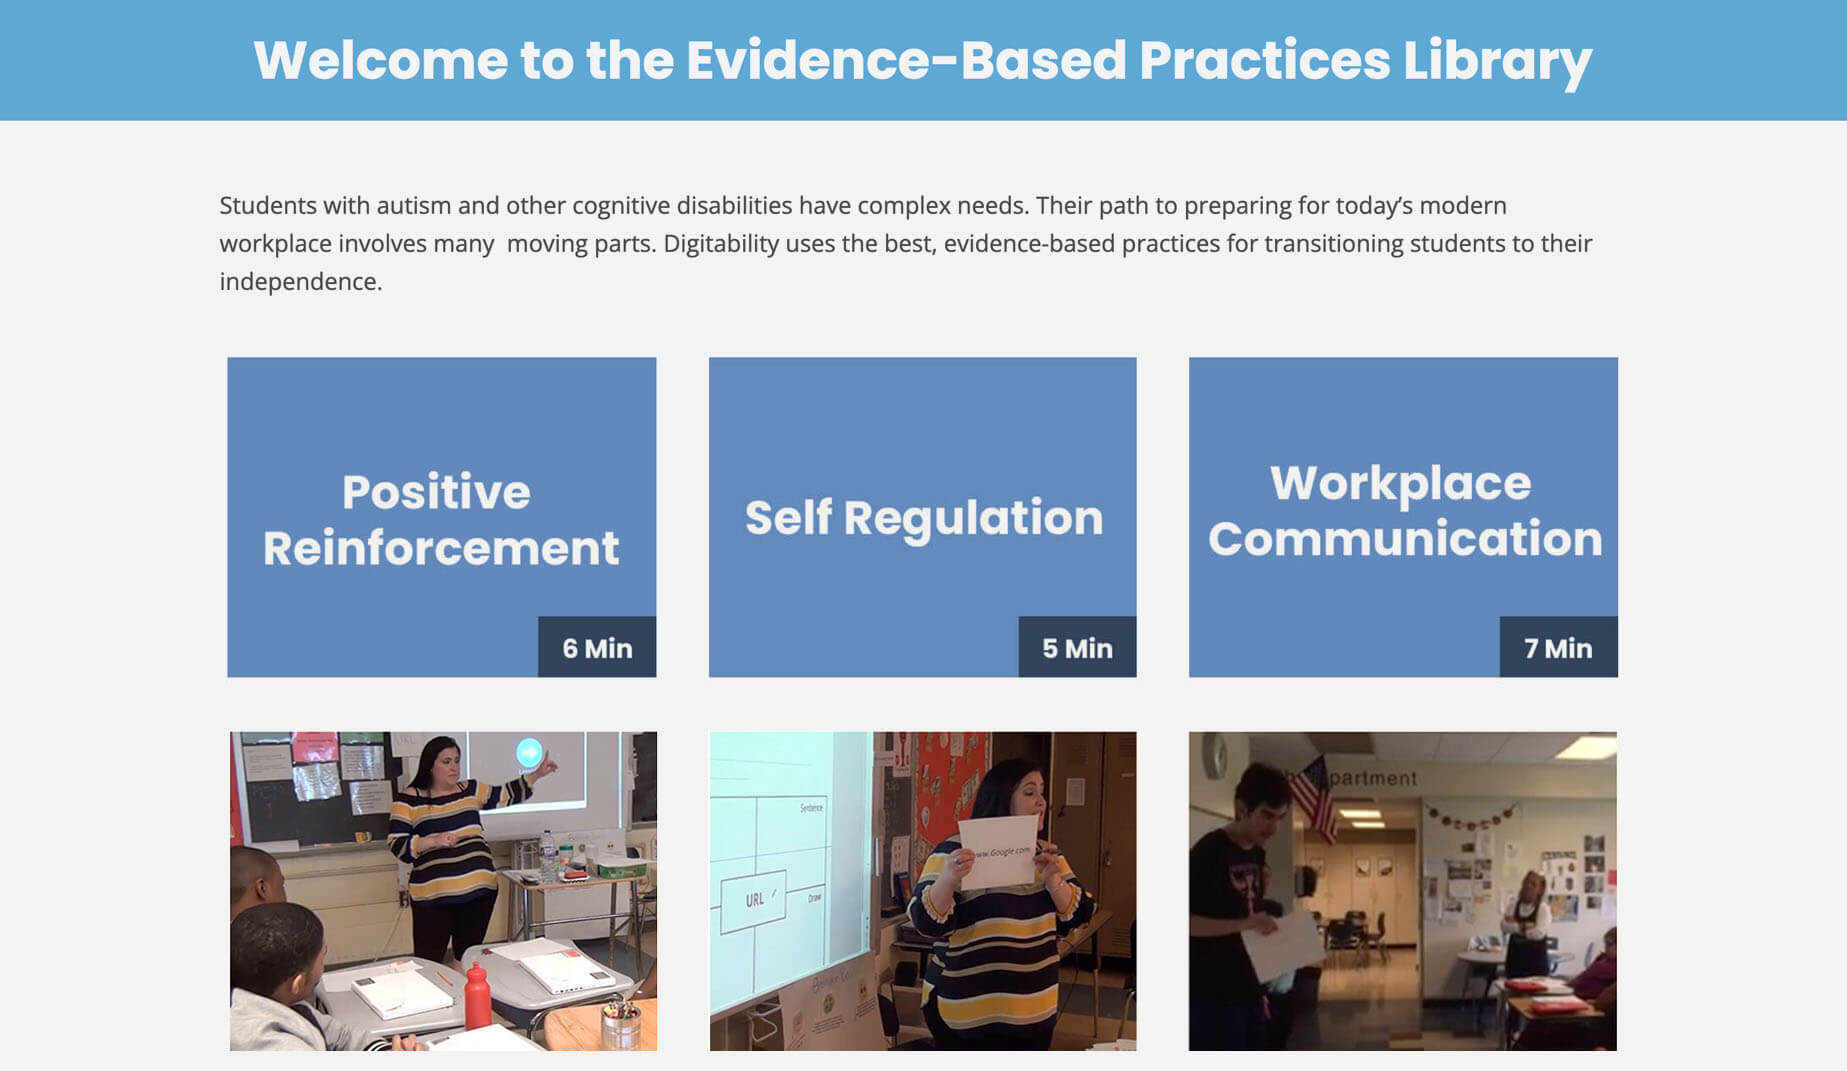 Visit Digitability’s Evidence-Based Practices Library